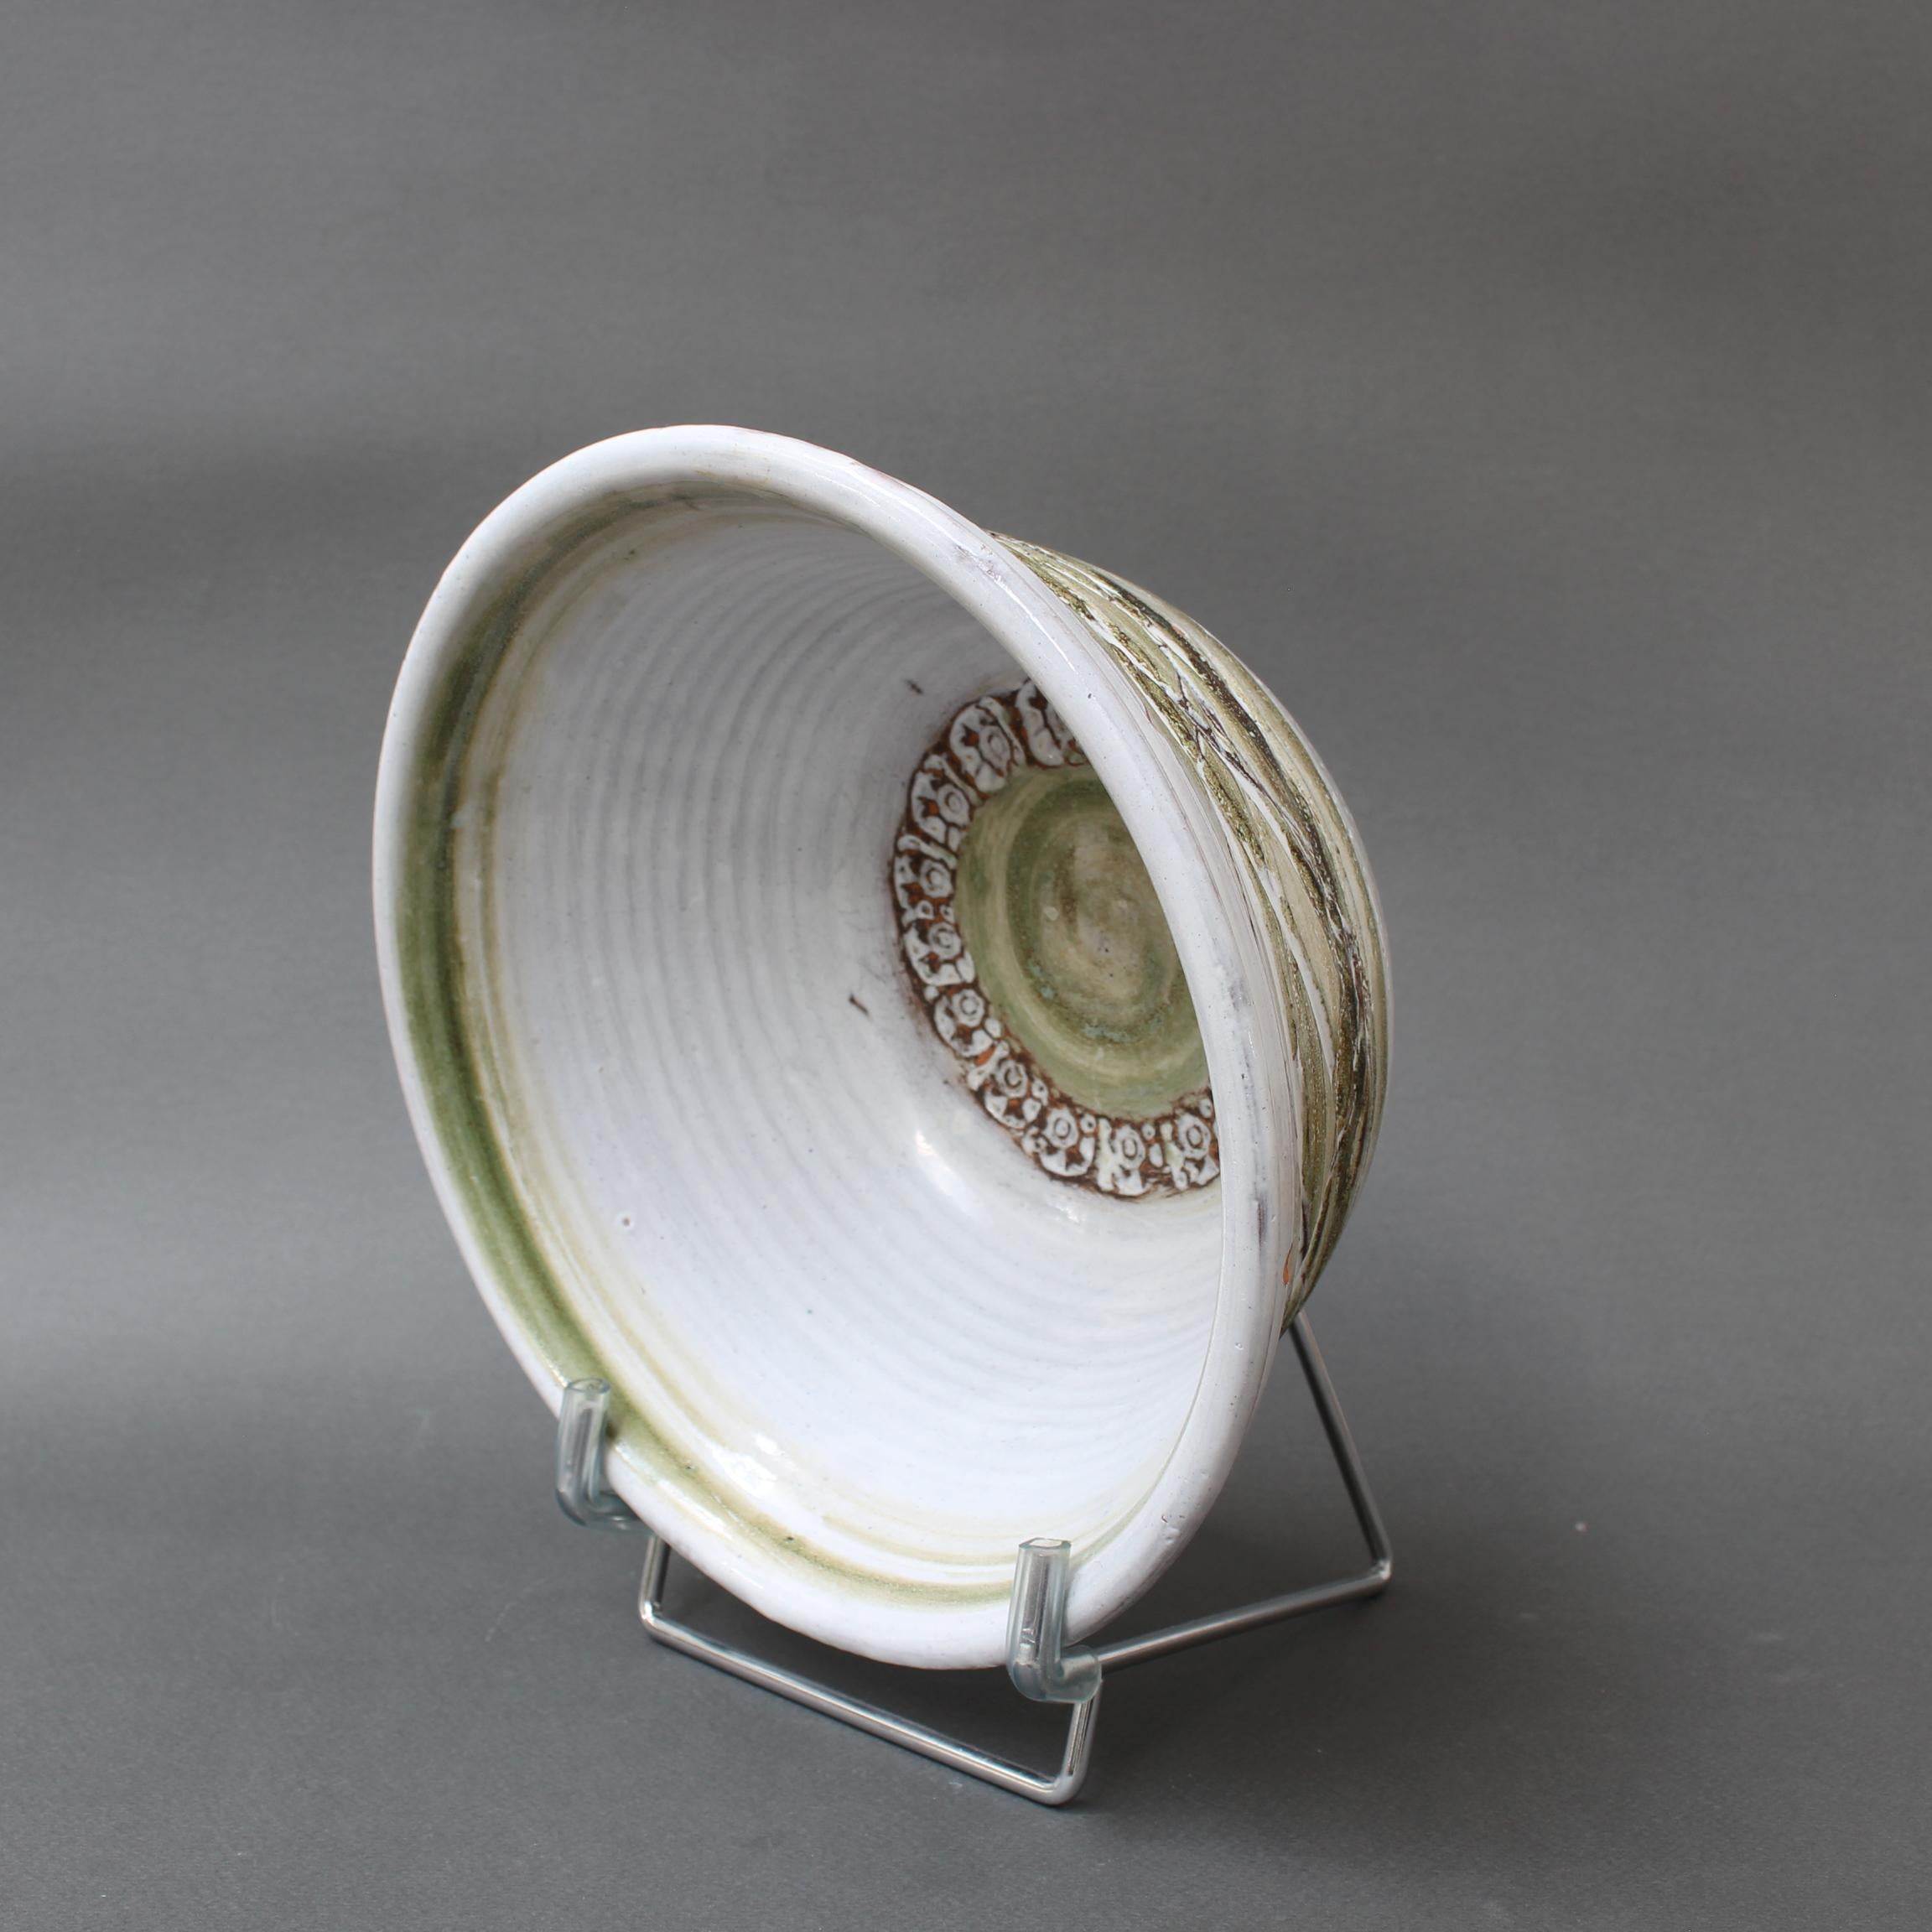 Mid-century decorative ceramic bowl (circa 1960s) by Albert Thiry. Chalky-white glazed interior sides prepare the viewer for the delightful base which consists of a circle of subtle sage green encircled by incised leaf motif with a sunflower effect.